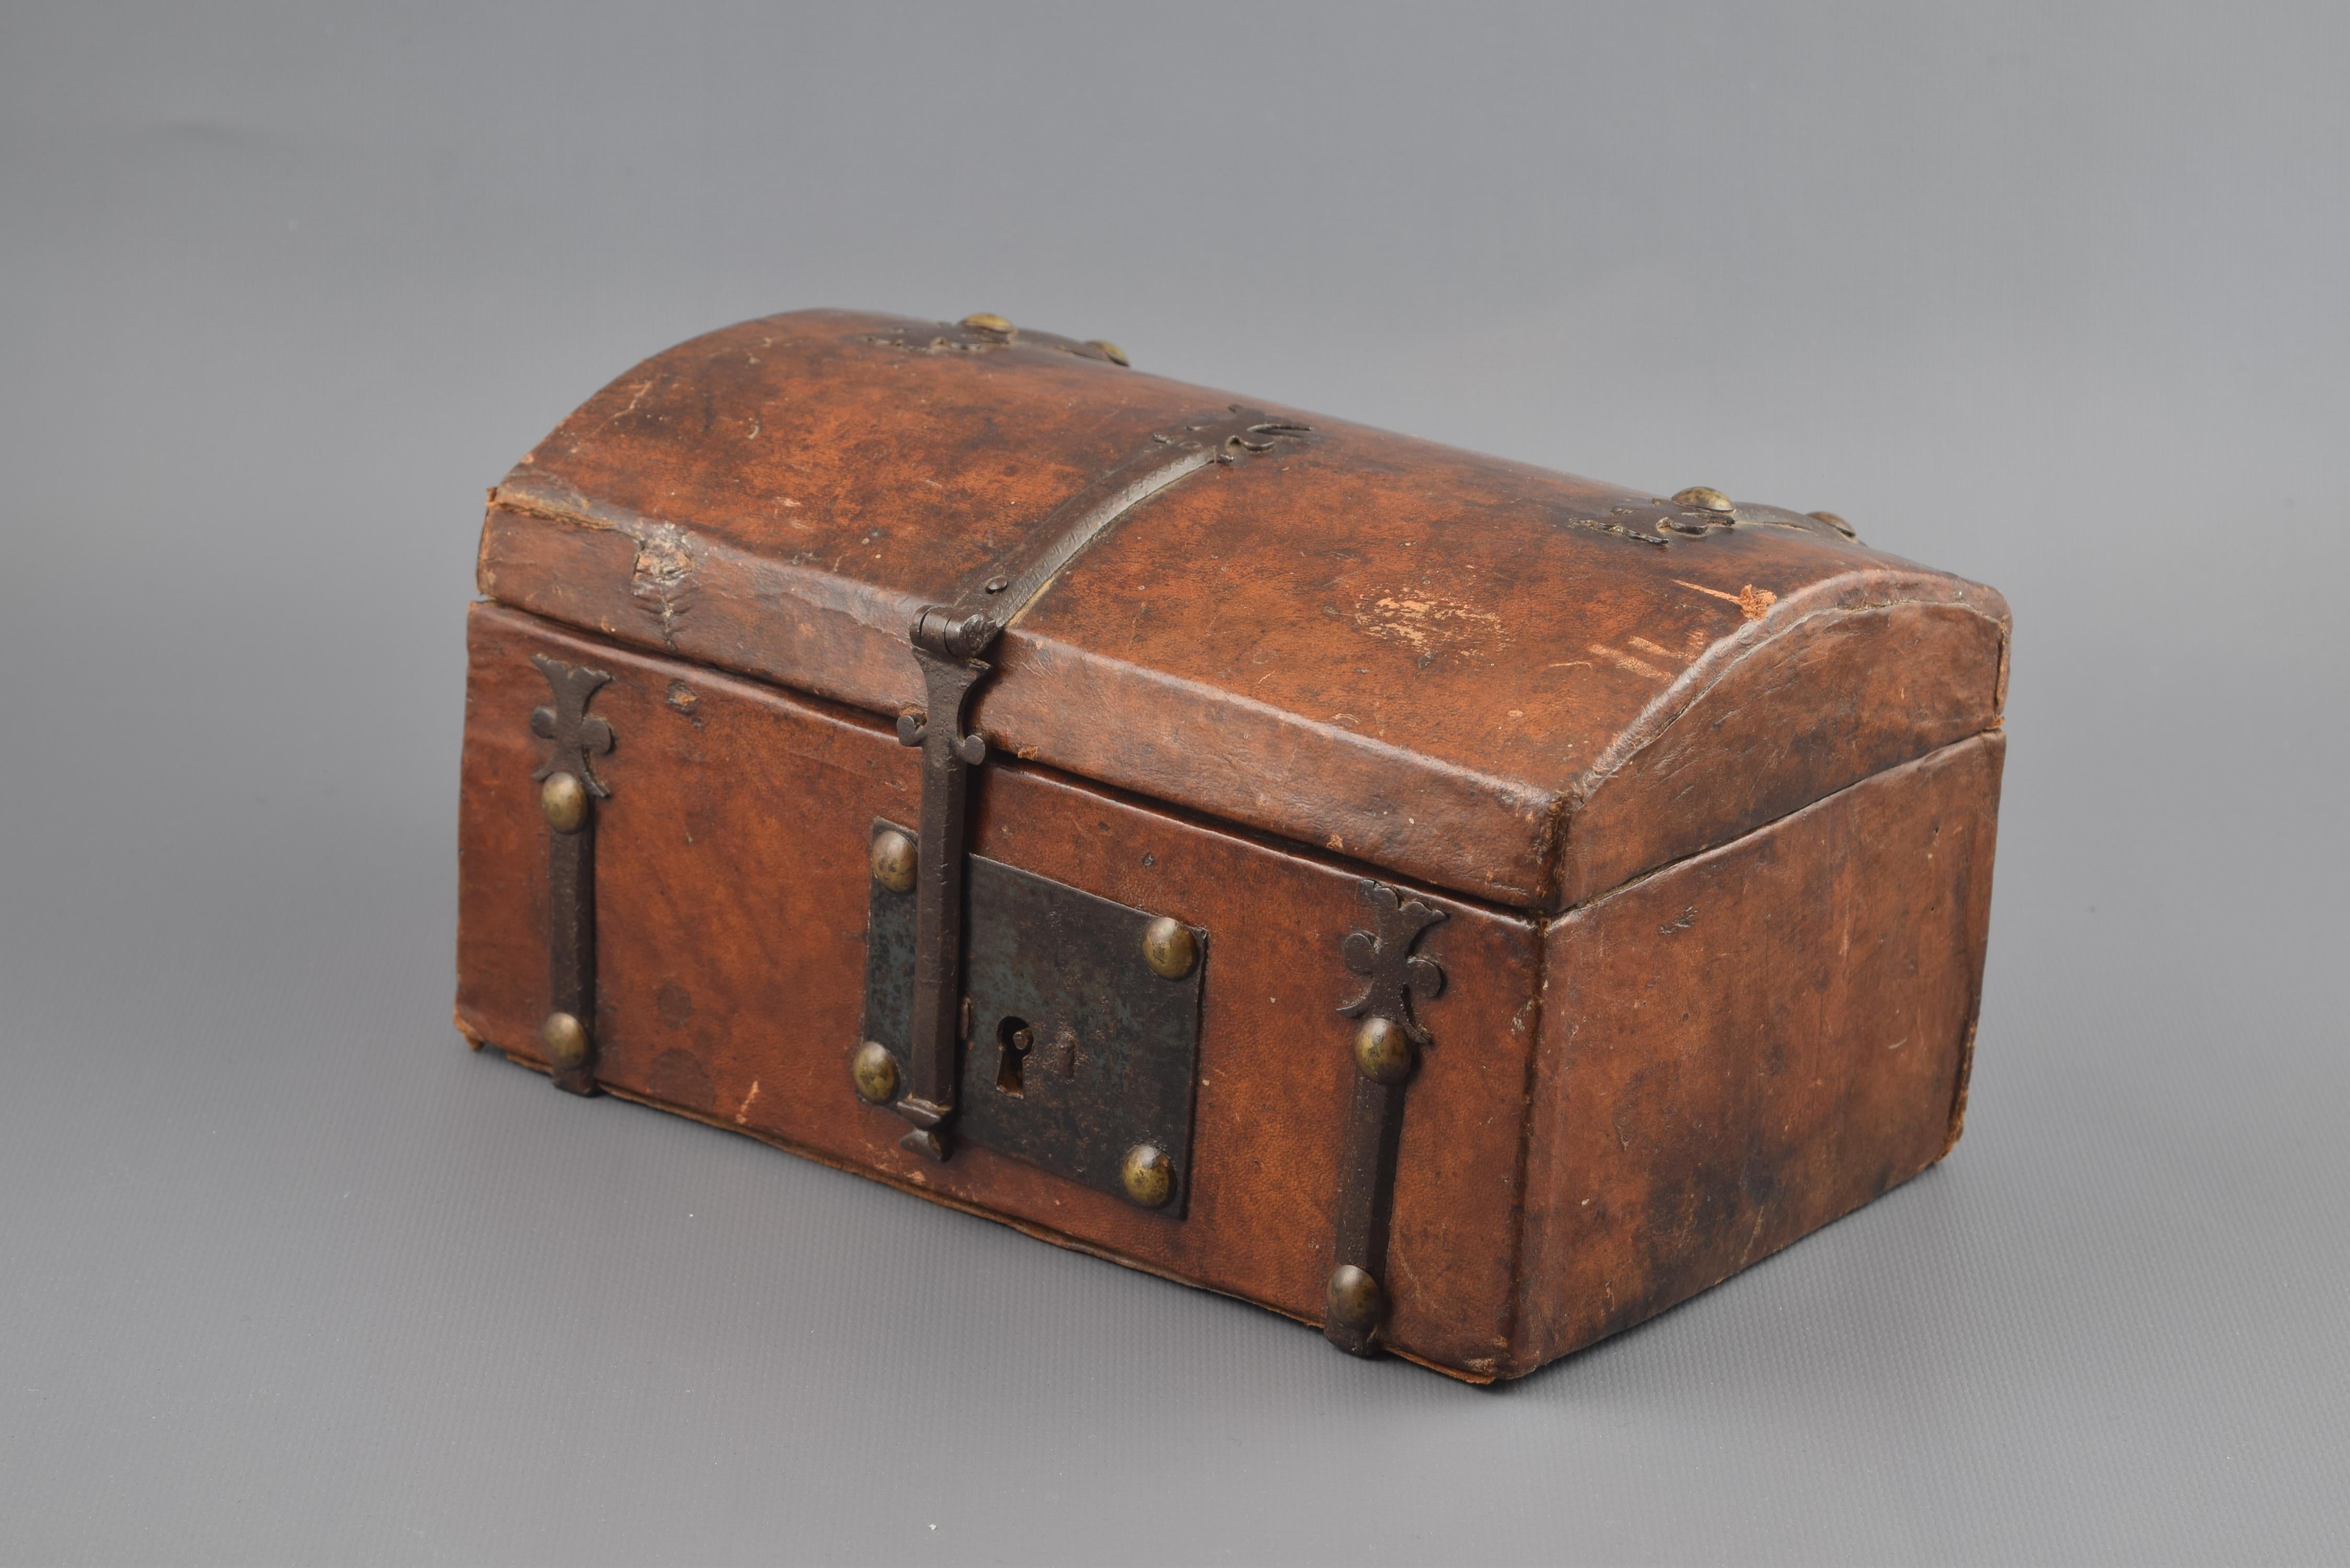 Baroque Wooden Chest, Leather and Metal, 17th Century